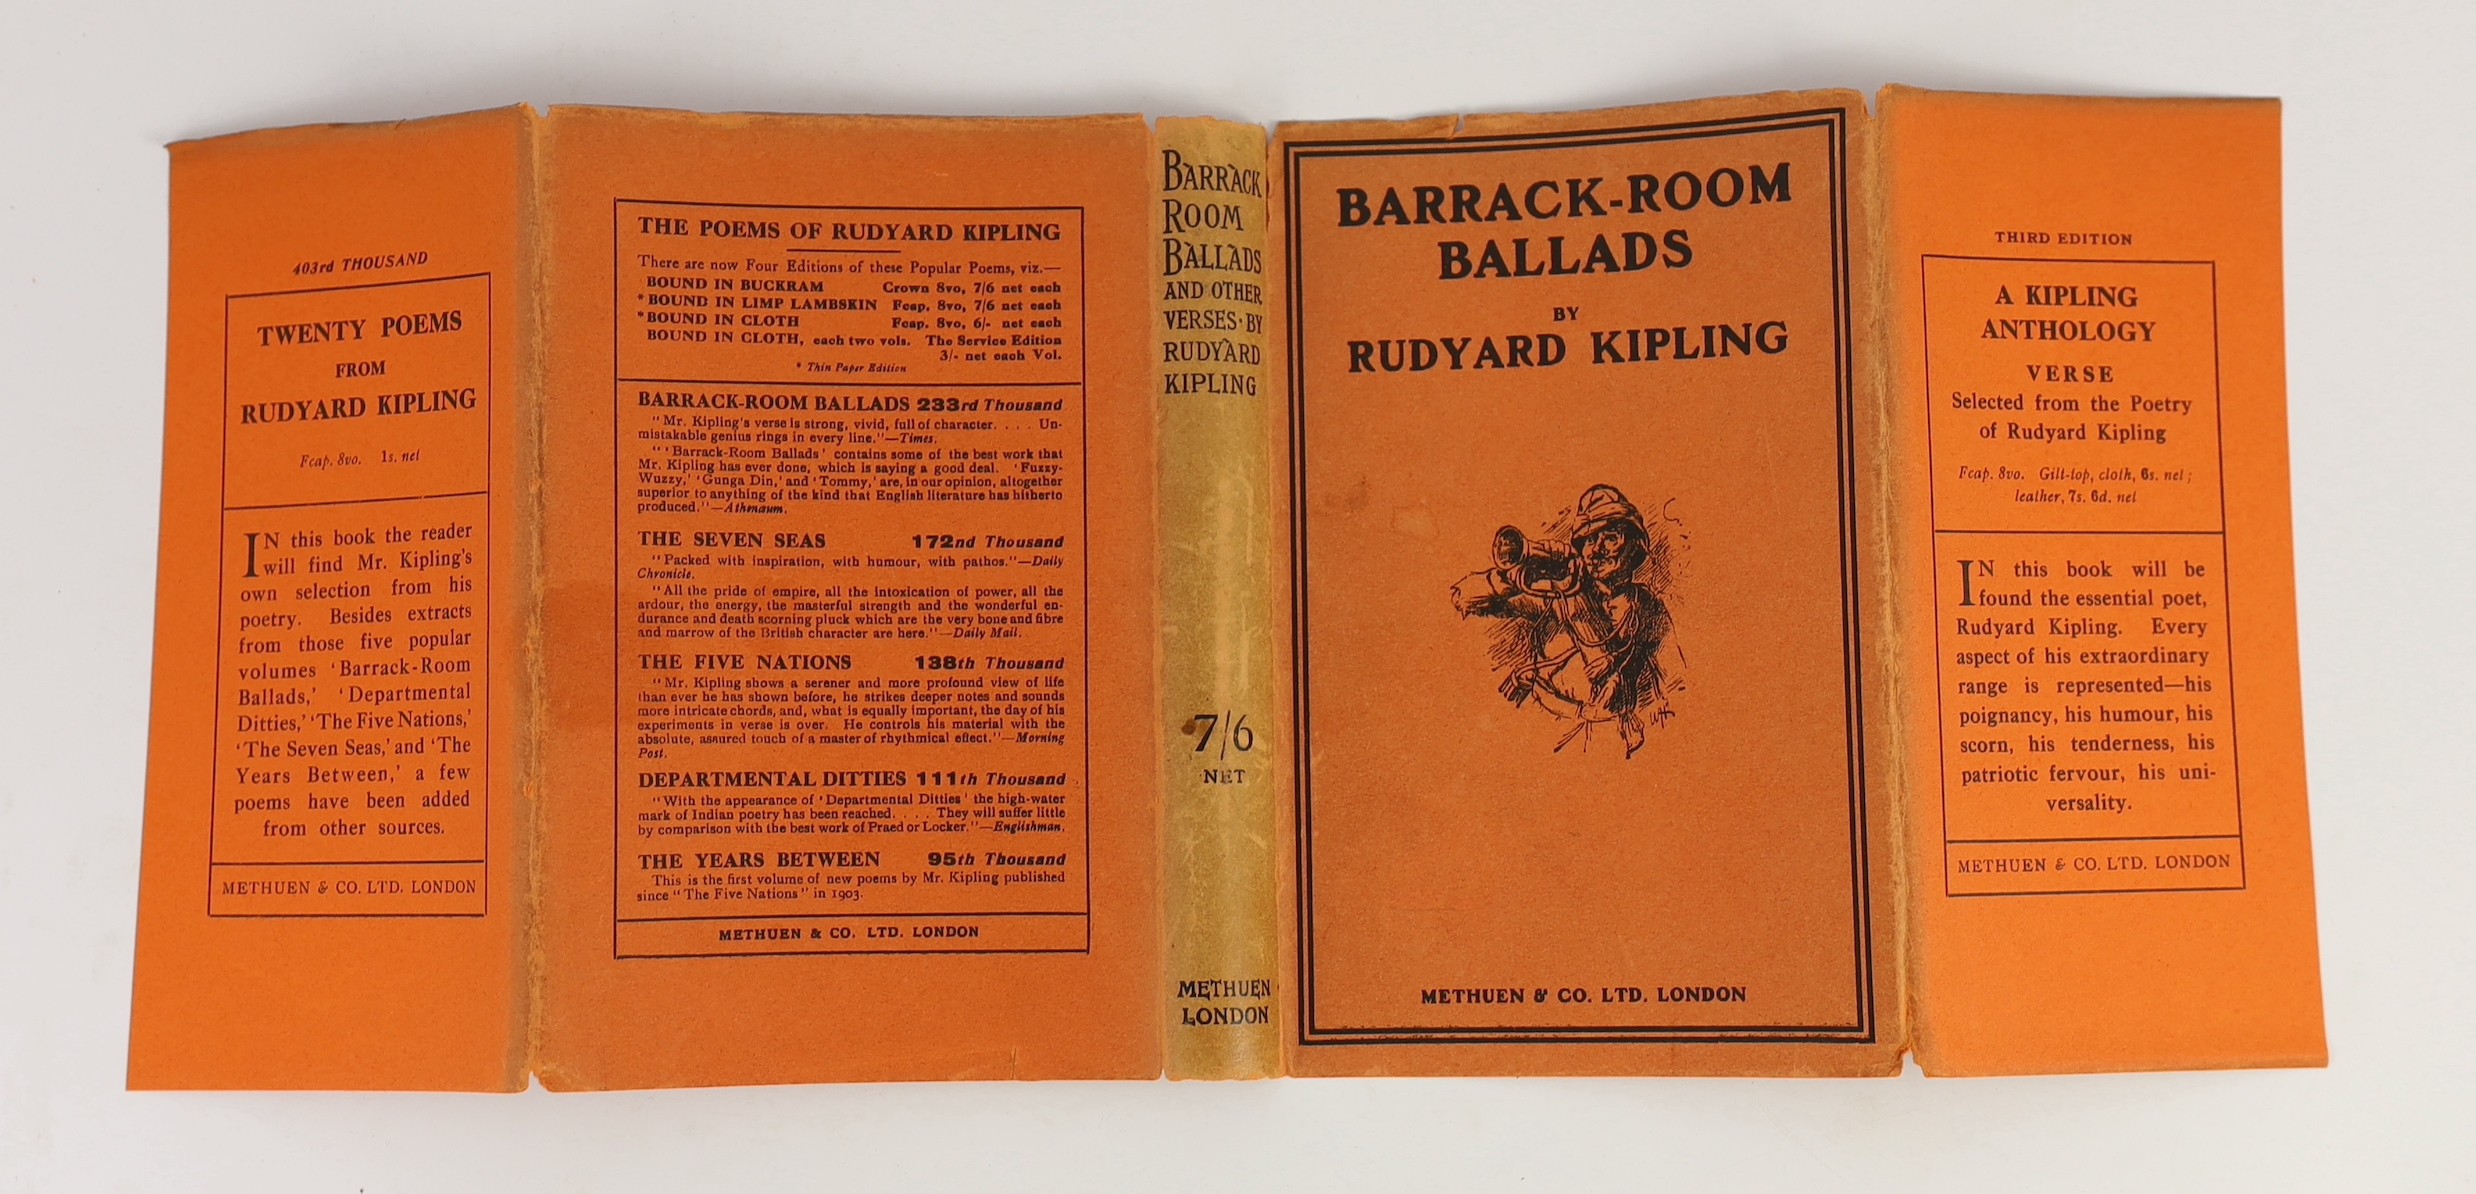 Kipling, Rudyard - Barrack Room Ballads and Other Verses, 55th edition, title illus., half title; publisher's gilt-lettered cloth and pictorial d/wrapper. 1921. signed by the author on title